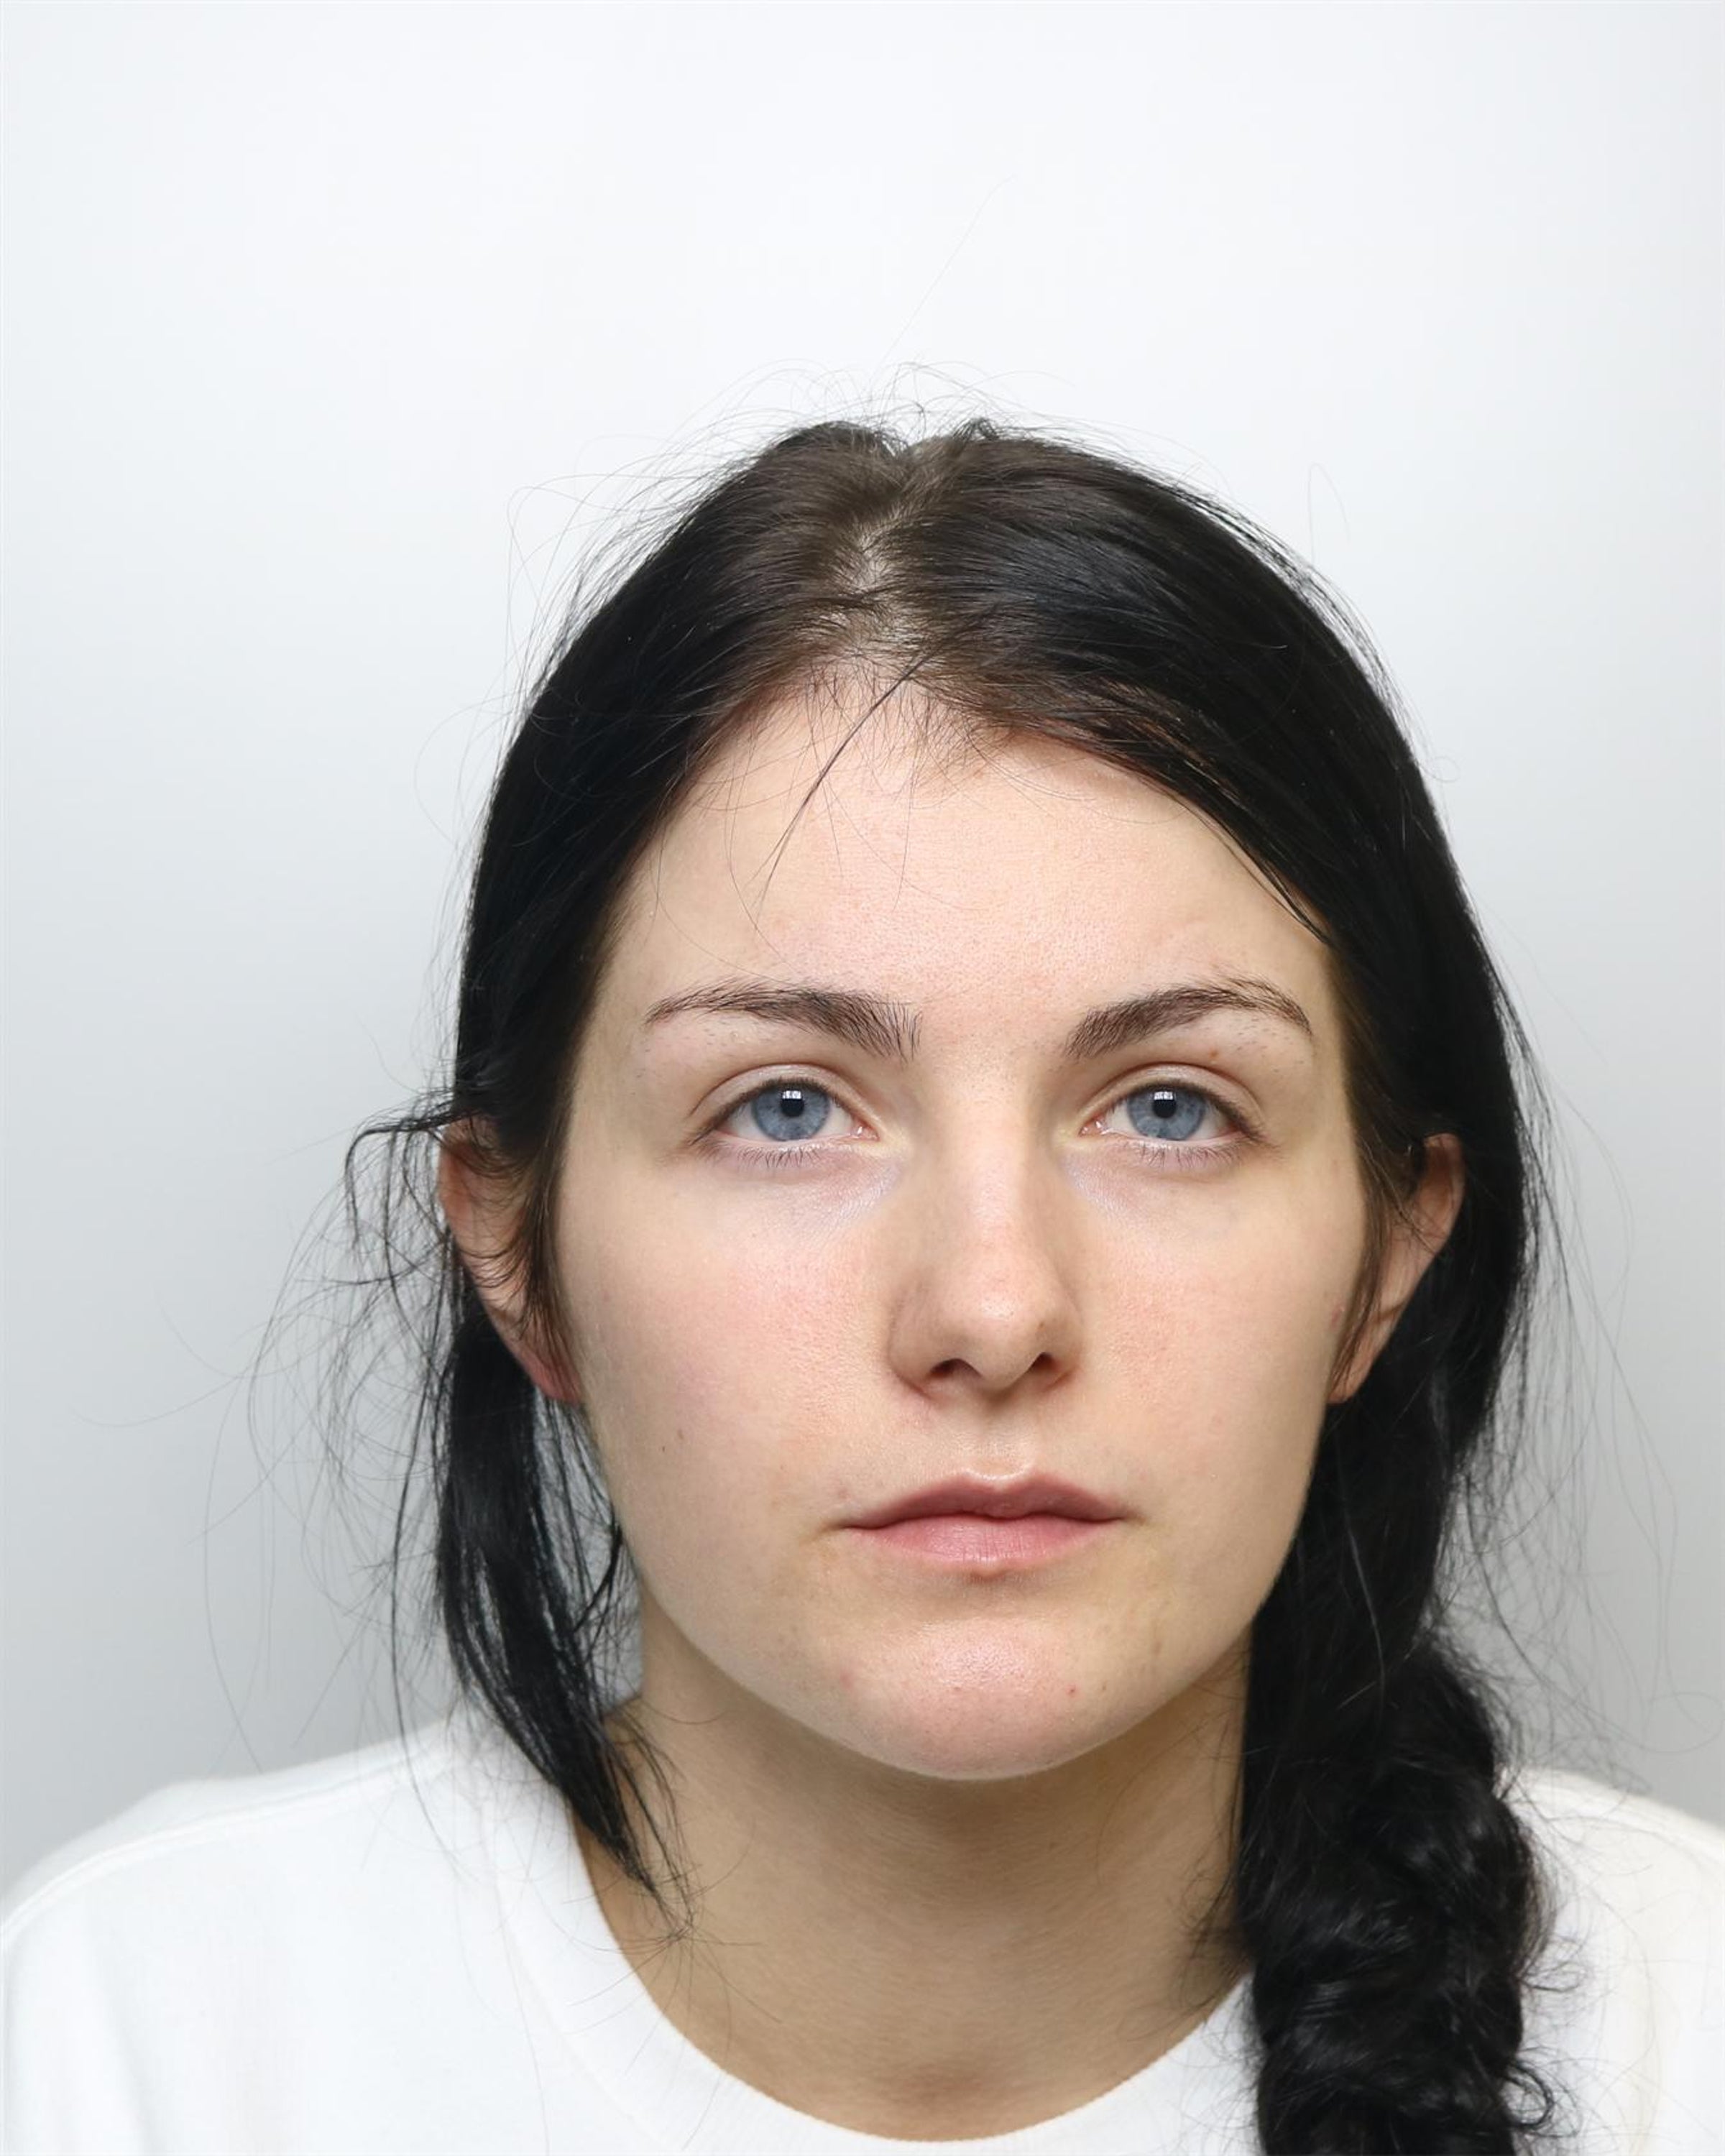 Frankie Smith, who was convicted of causing or allowing the death of her toddler daughter Star Hobson (West Yorkshire Police/PA)